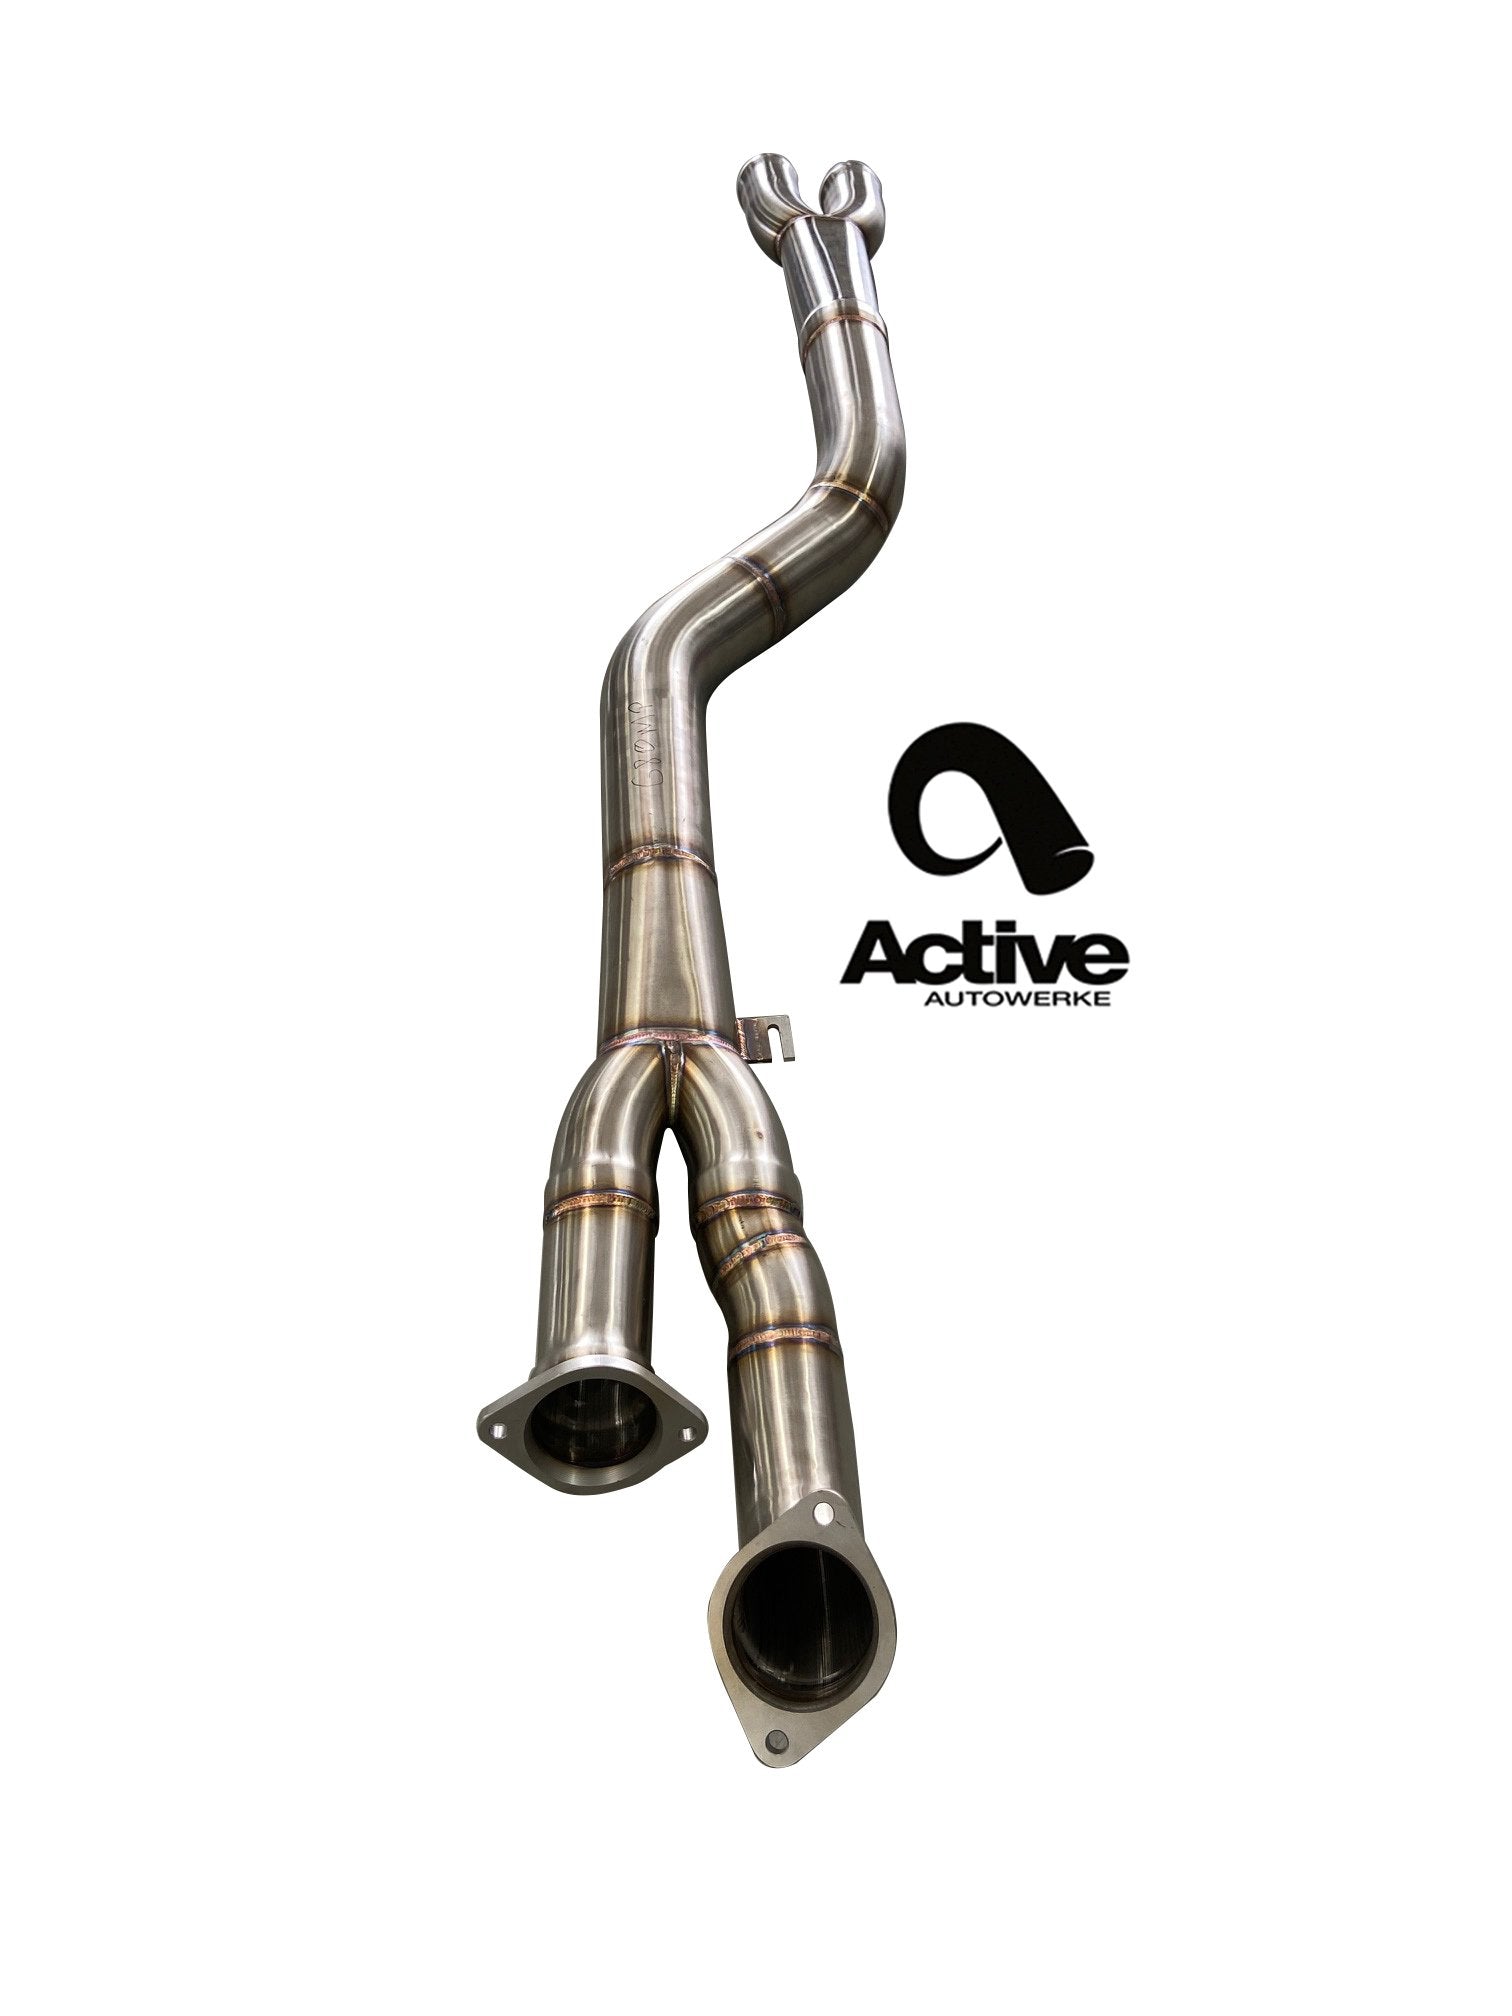 Active Autowerke G80/G82 M3/M4 Signature single mid-pipe with G-brace